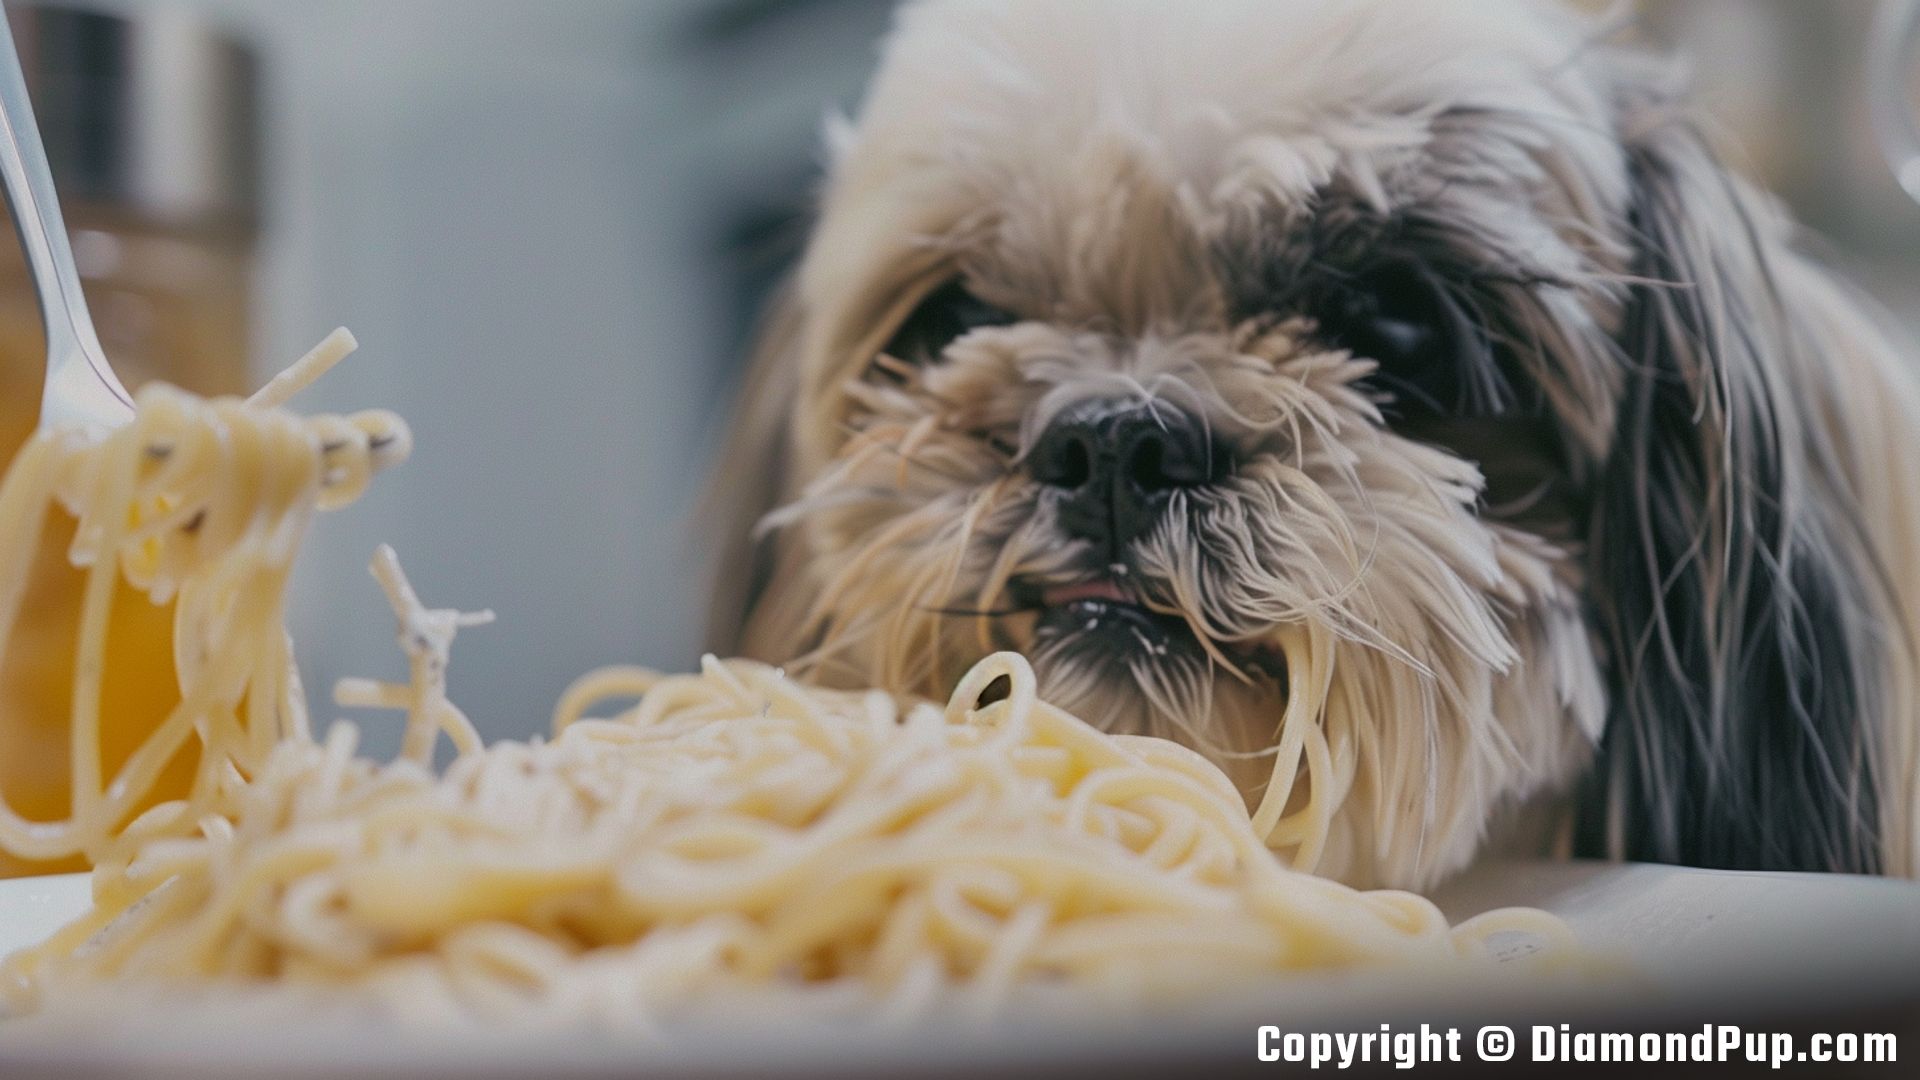 Photograph of a Playful Shih Tzu Snacking on Pasta